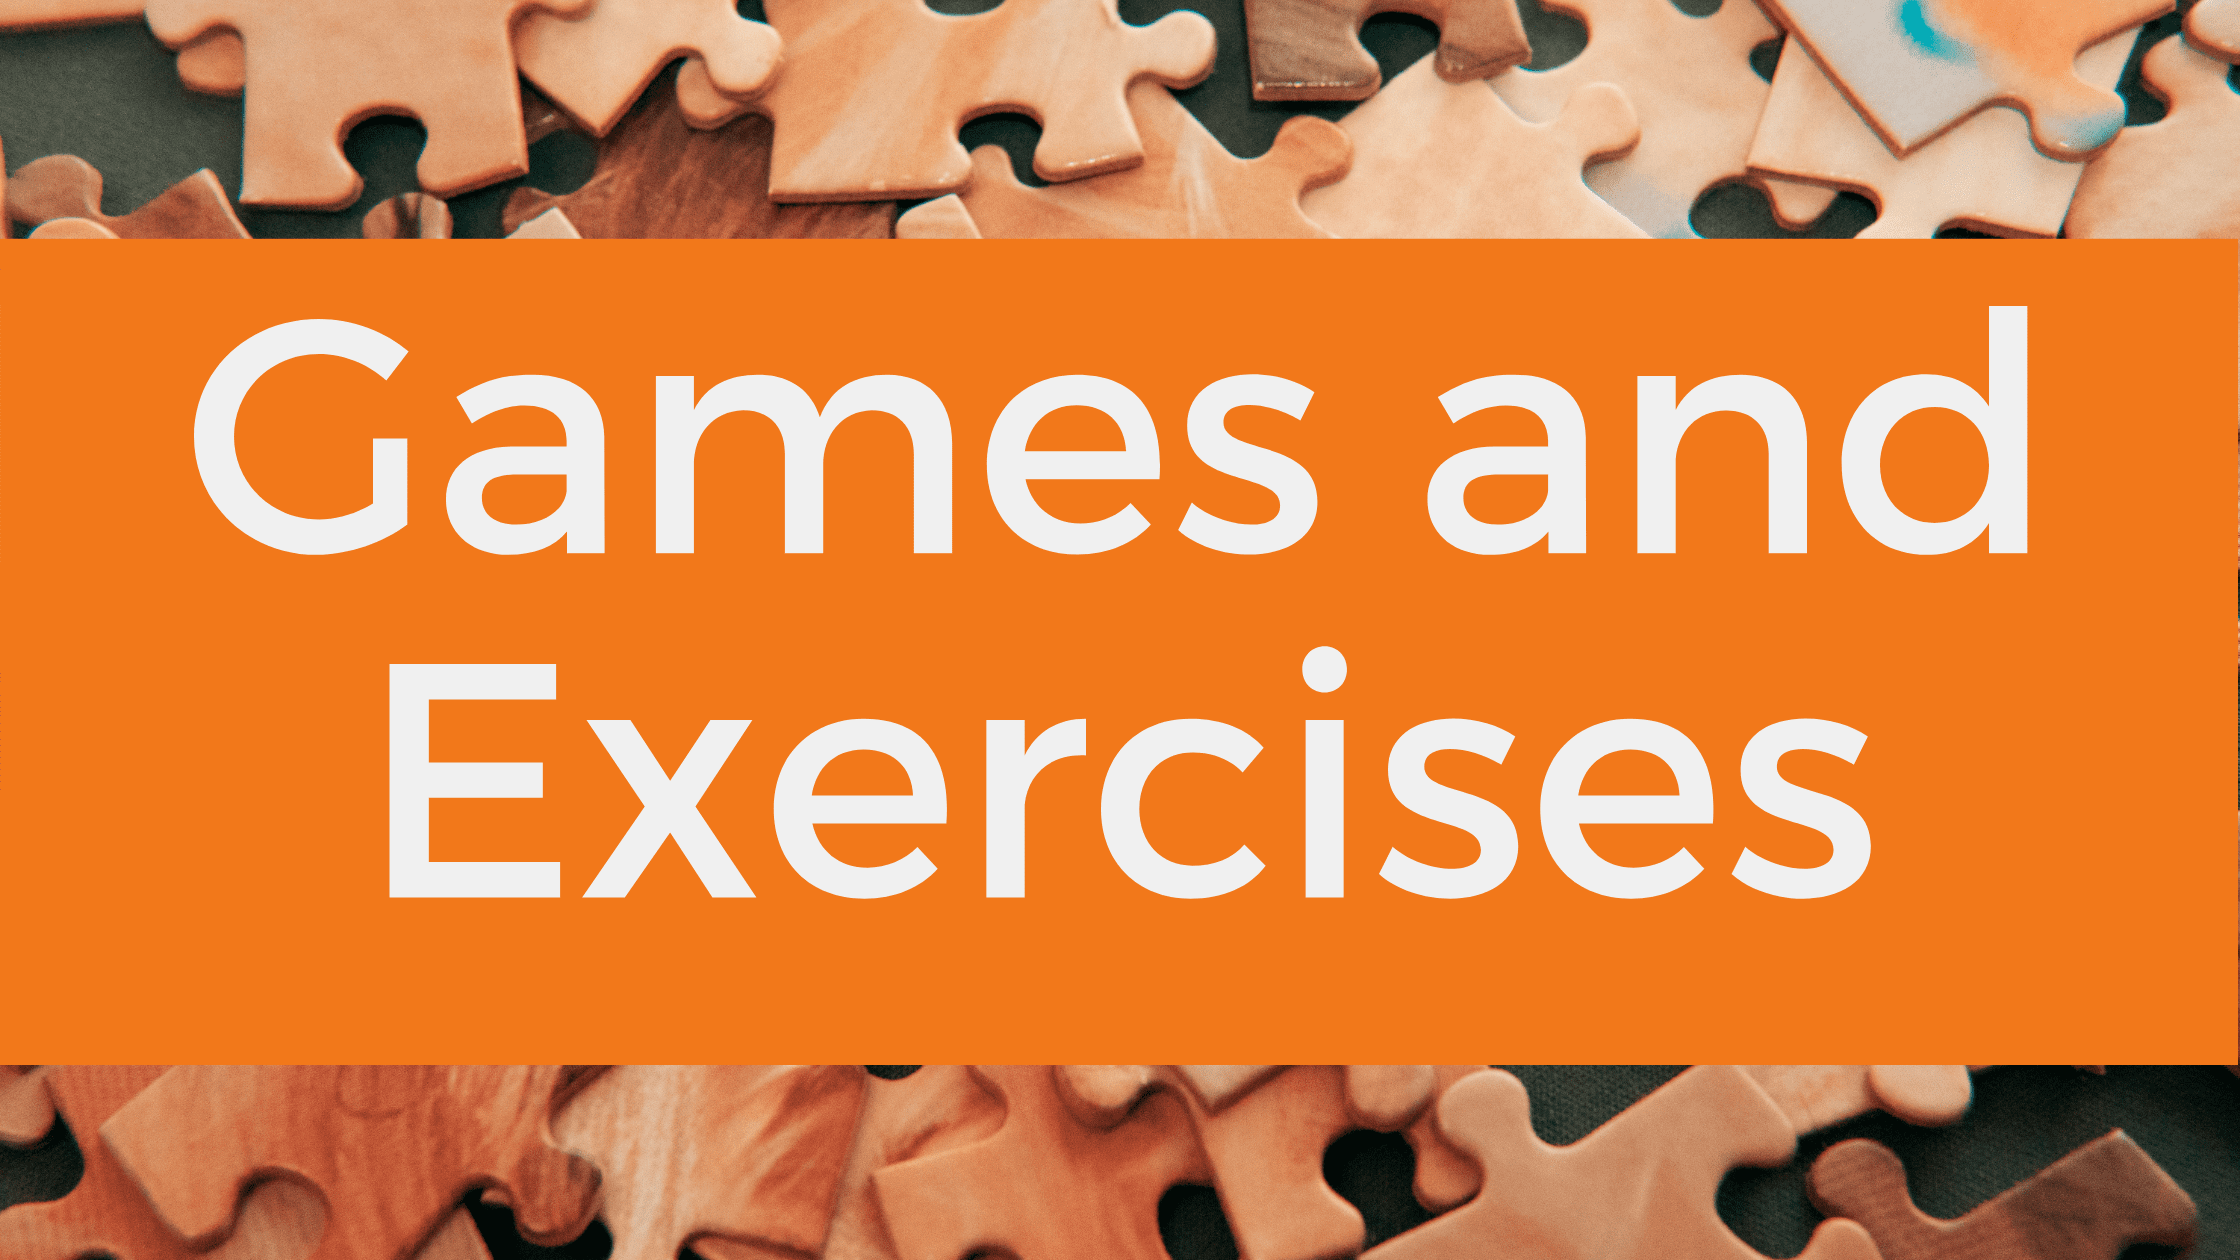 English games exercises learn online grammar vocabulary